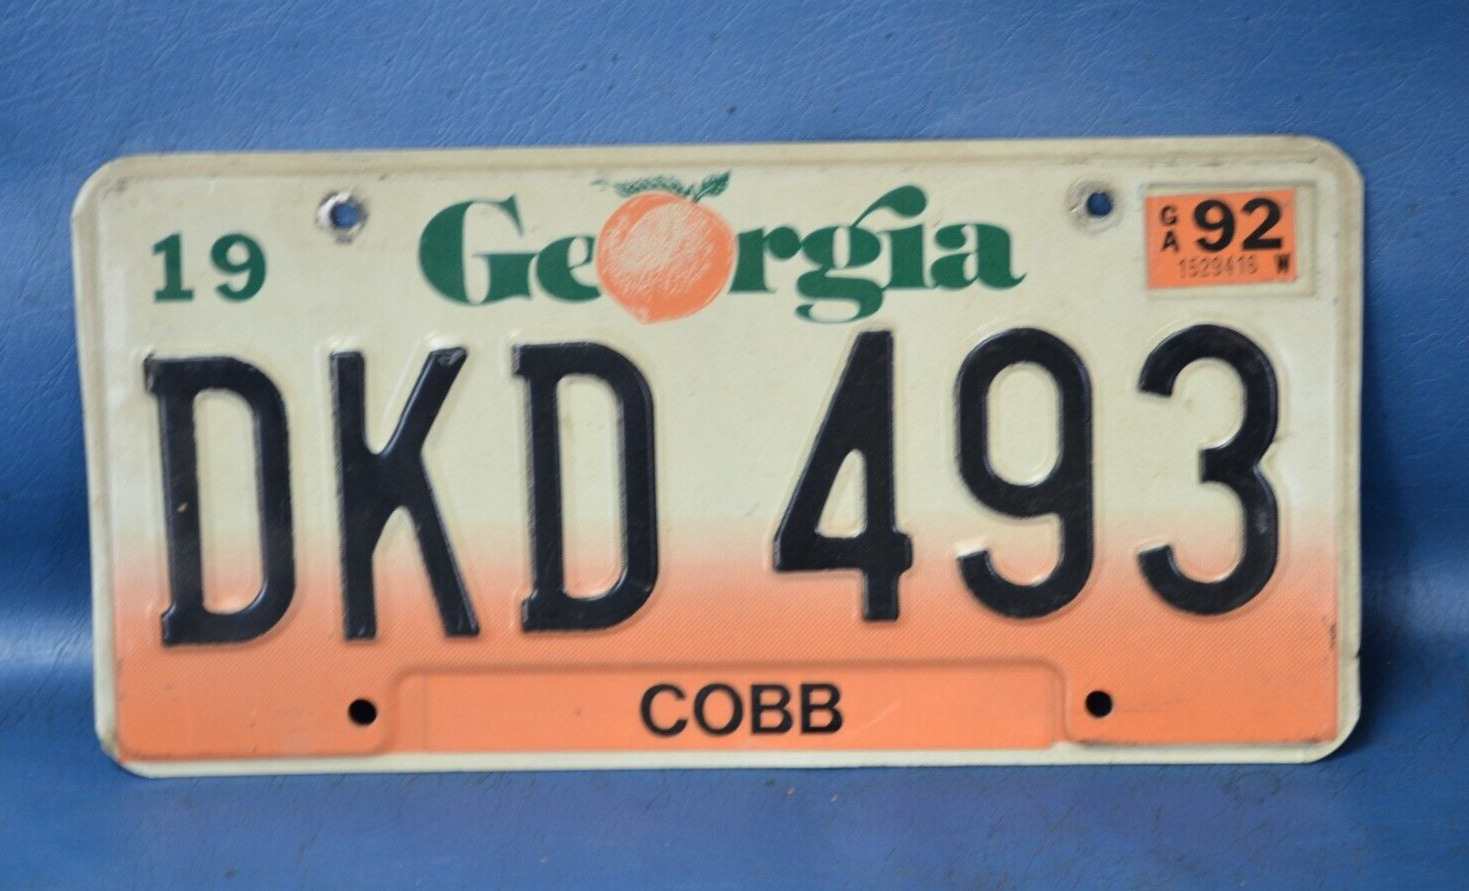 Vintage Georgia 1992 Peach Fade License Plate DKD 493 Cobb County Collectible